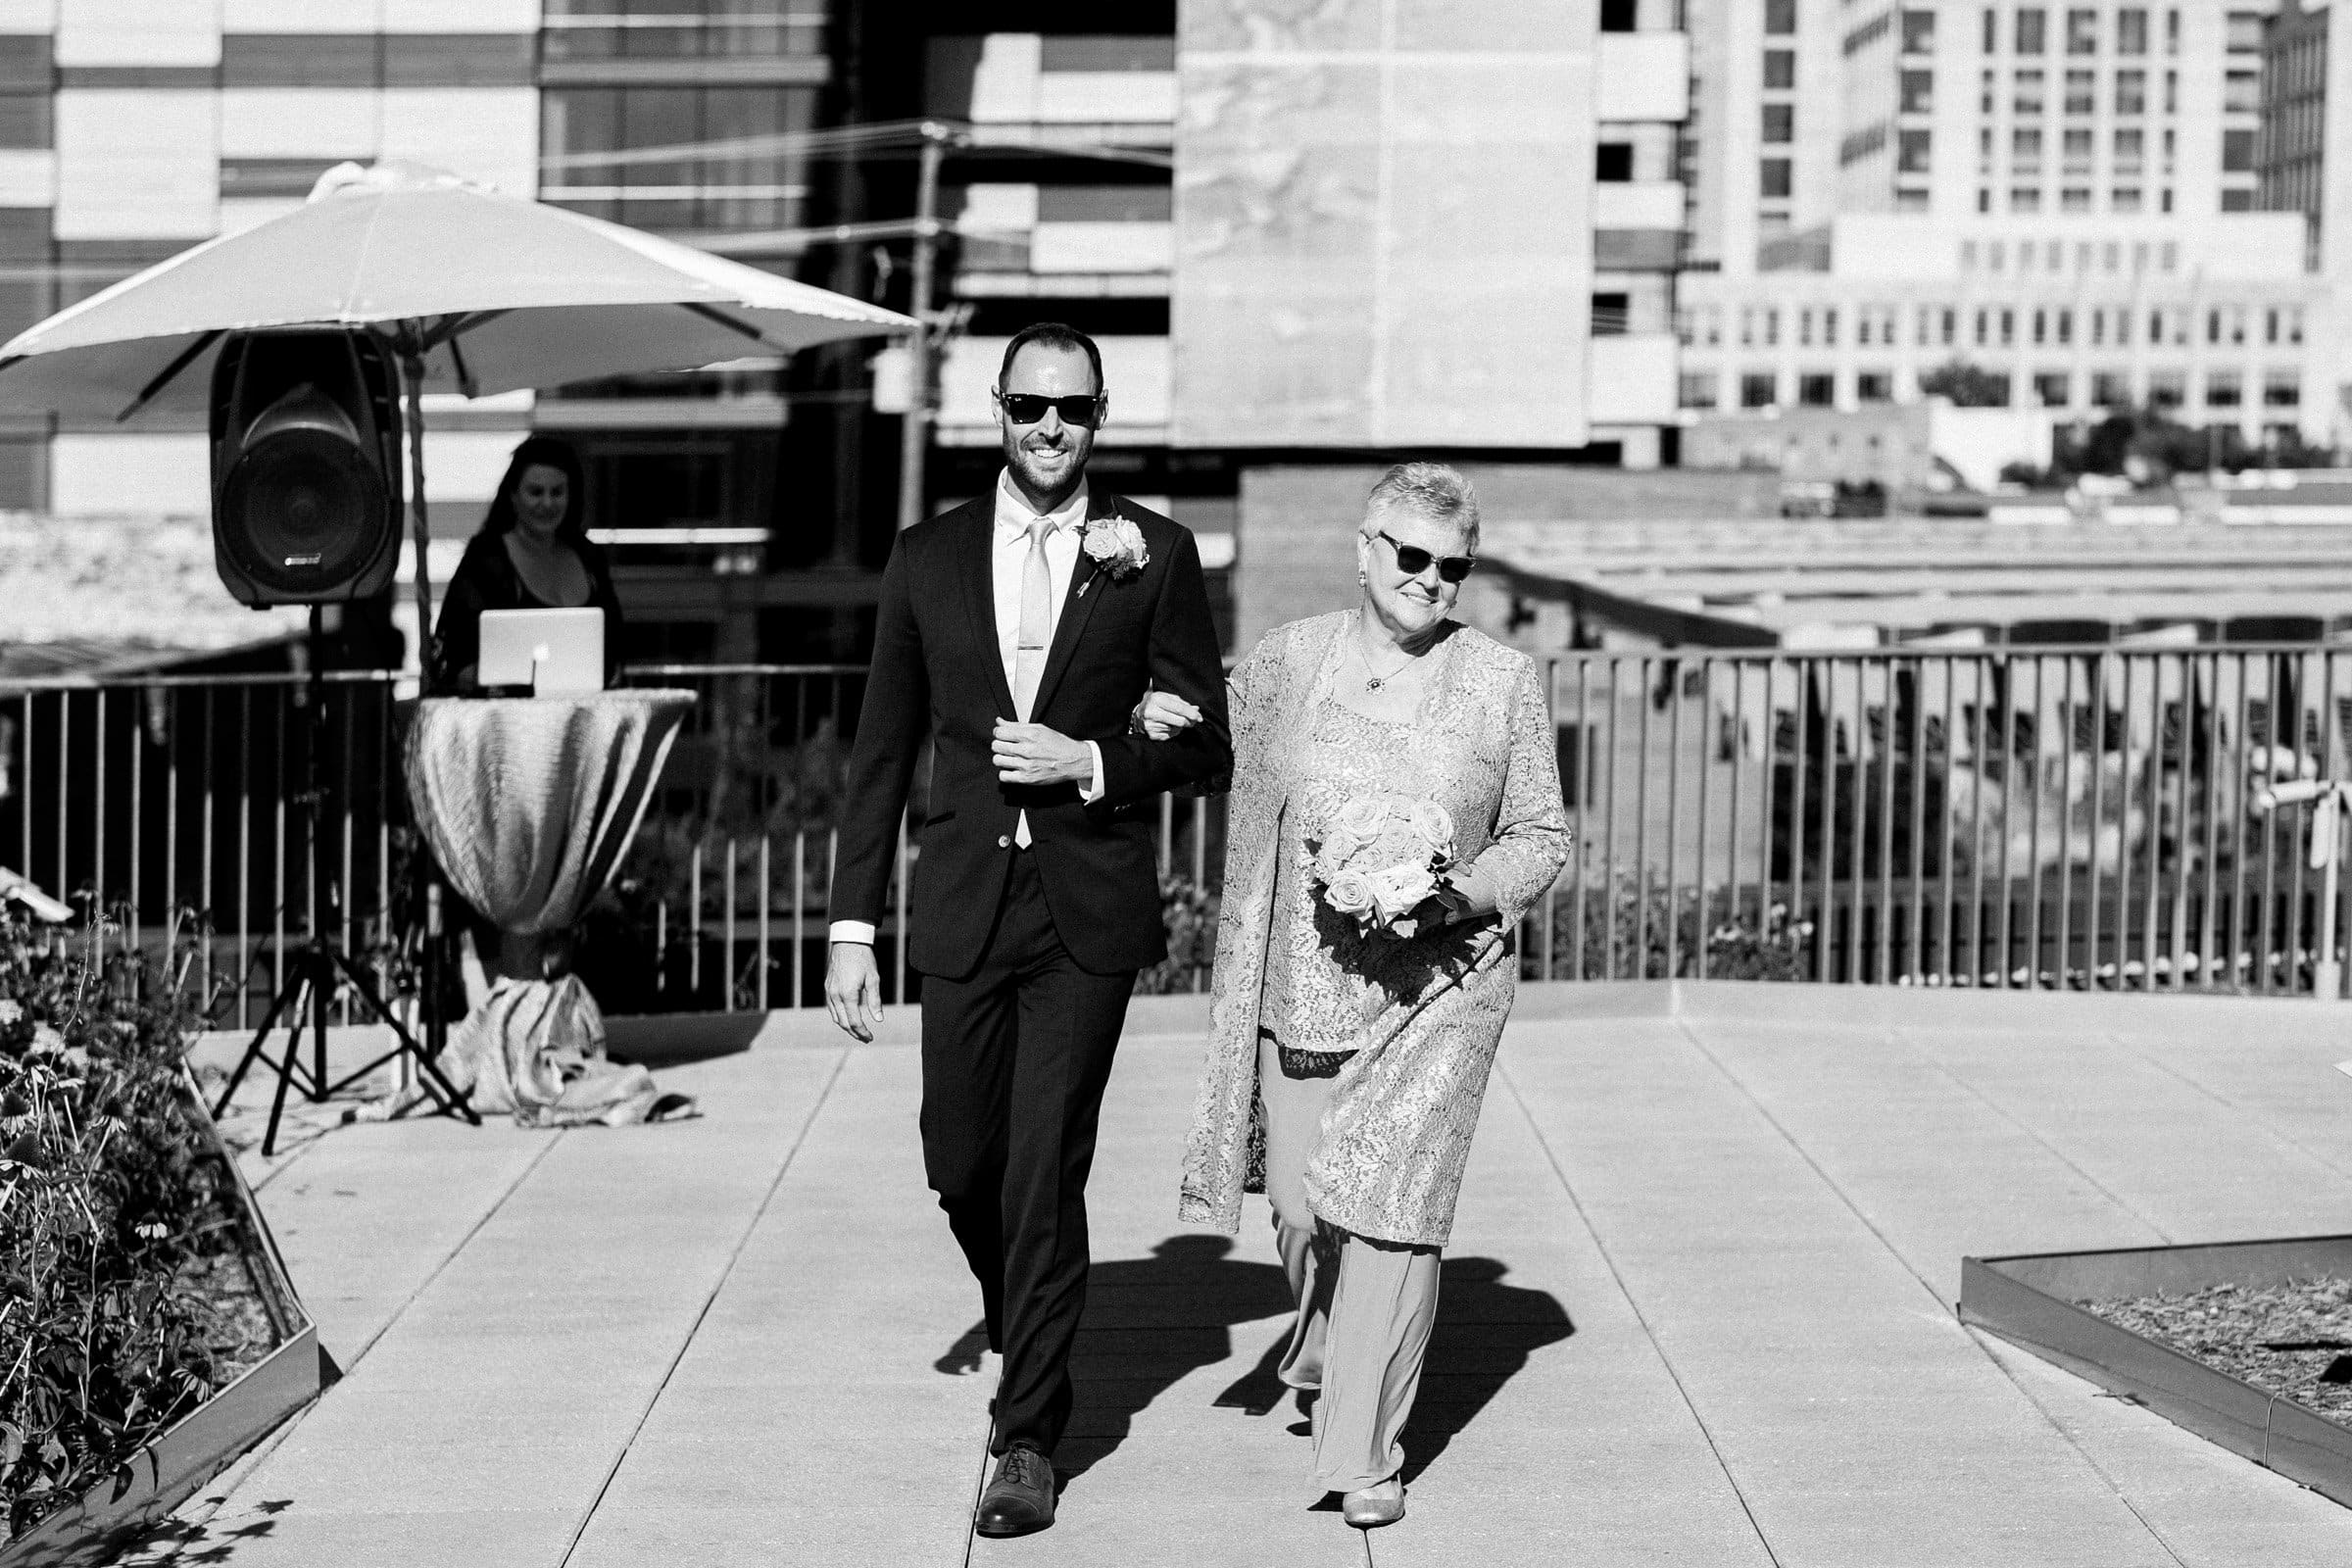 union station raleigh wedding photography – brian & brent